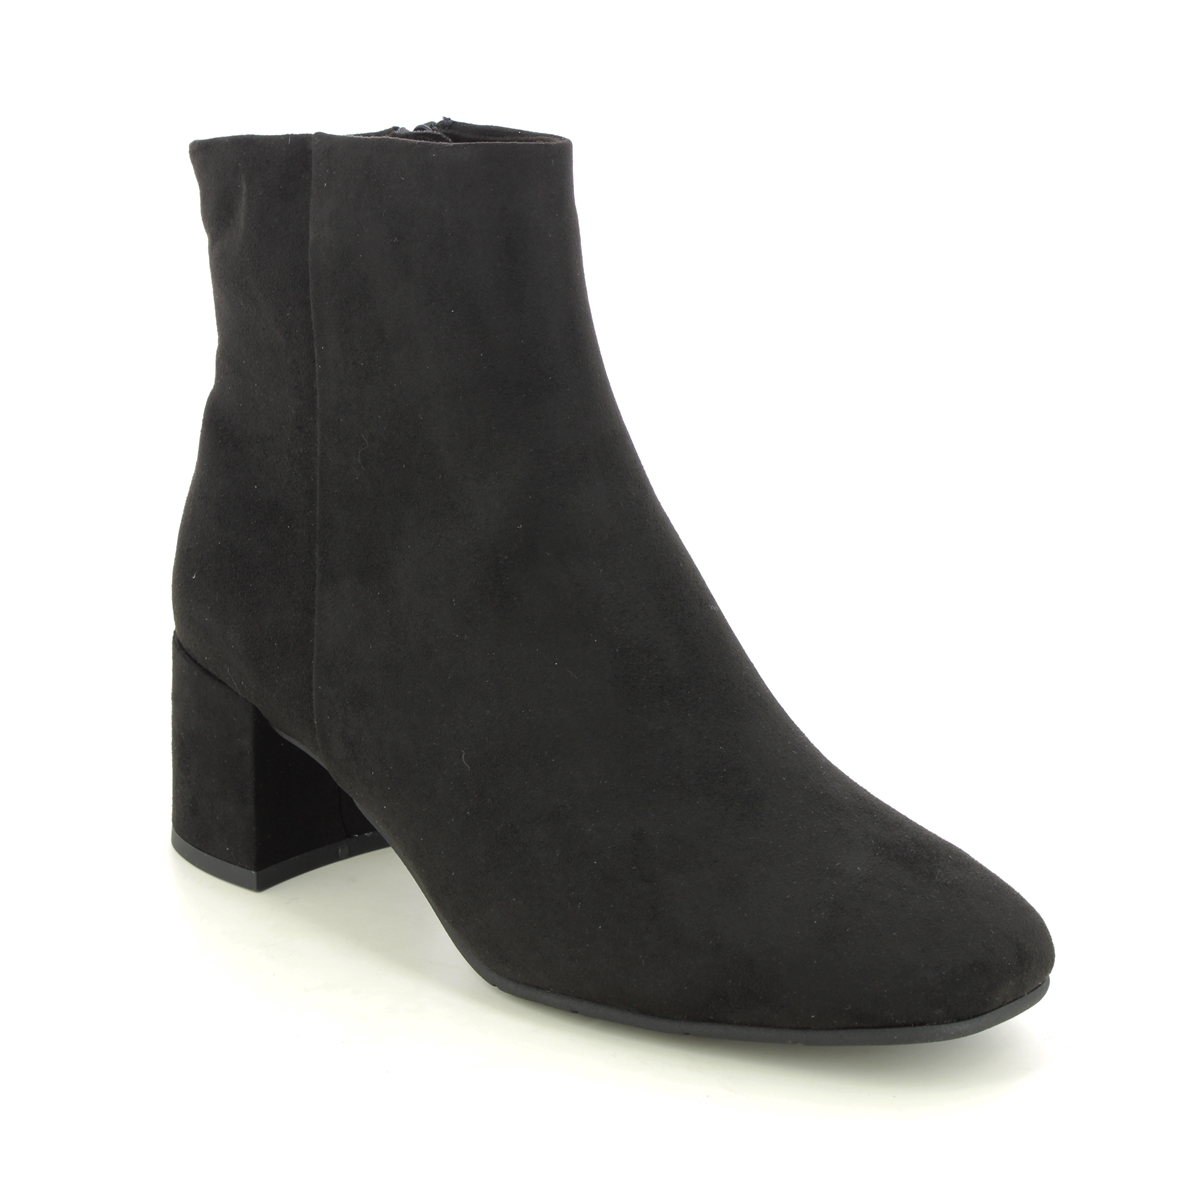 Marco Tozzi Vacco Black Womens Heeled Boots 25349-41-001 In Size 40 In Plain Black